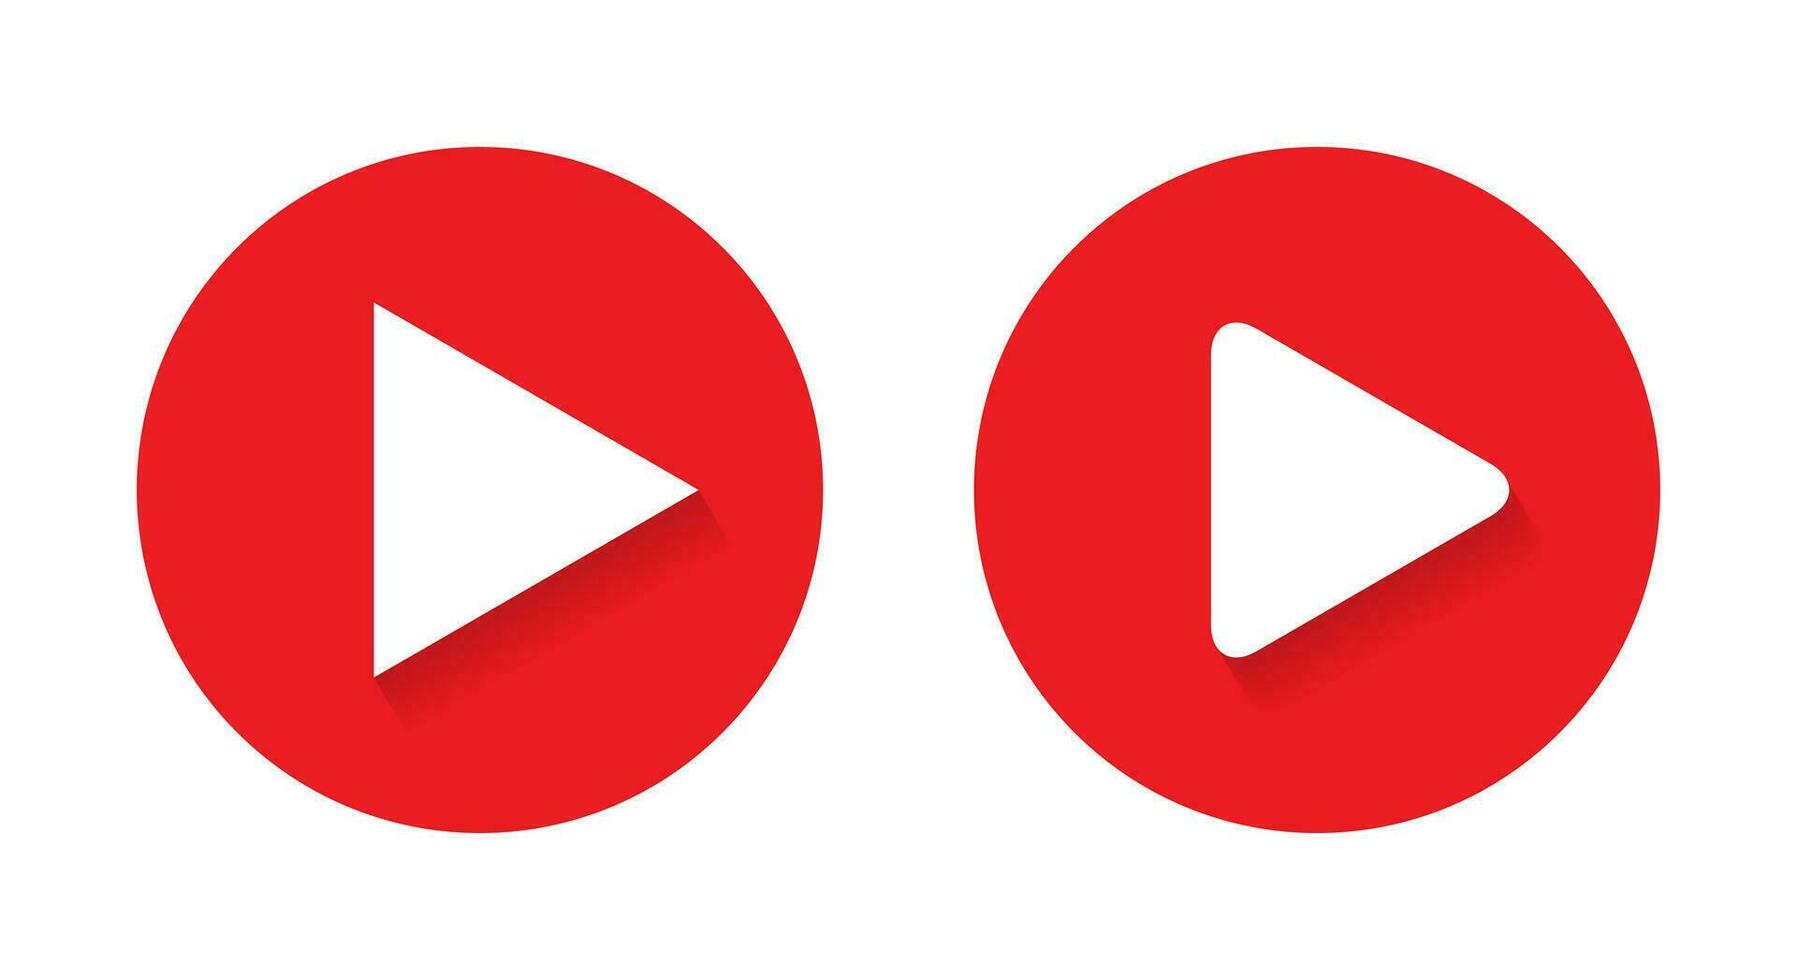 Red play button icon vector in flat style. Video player sign symbol